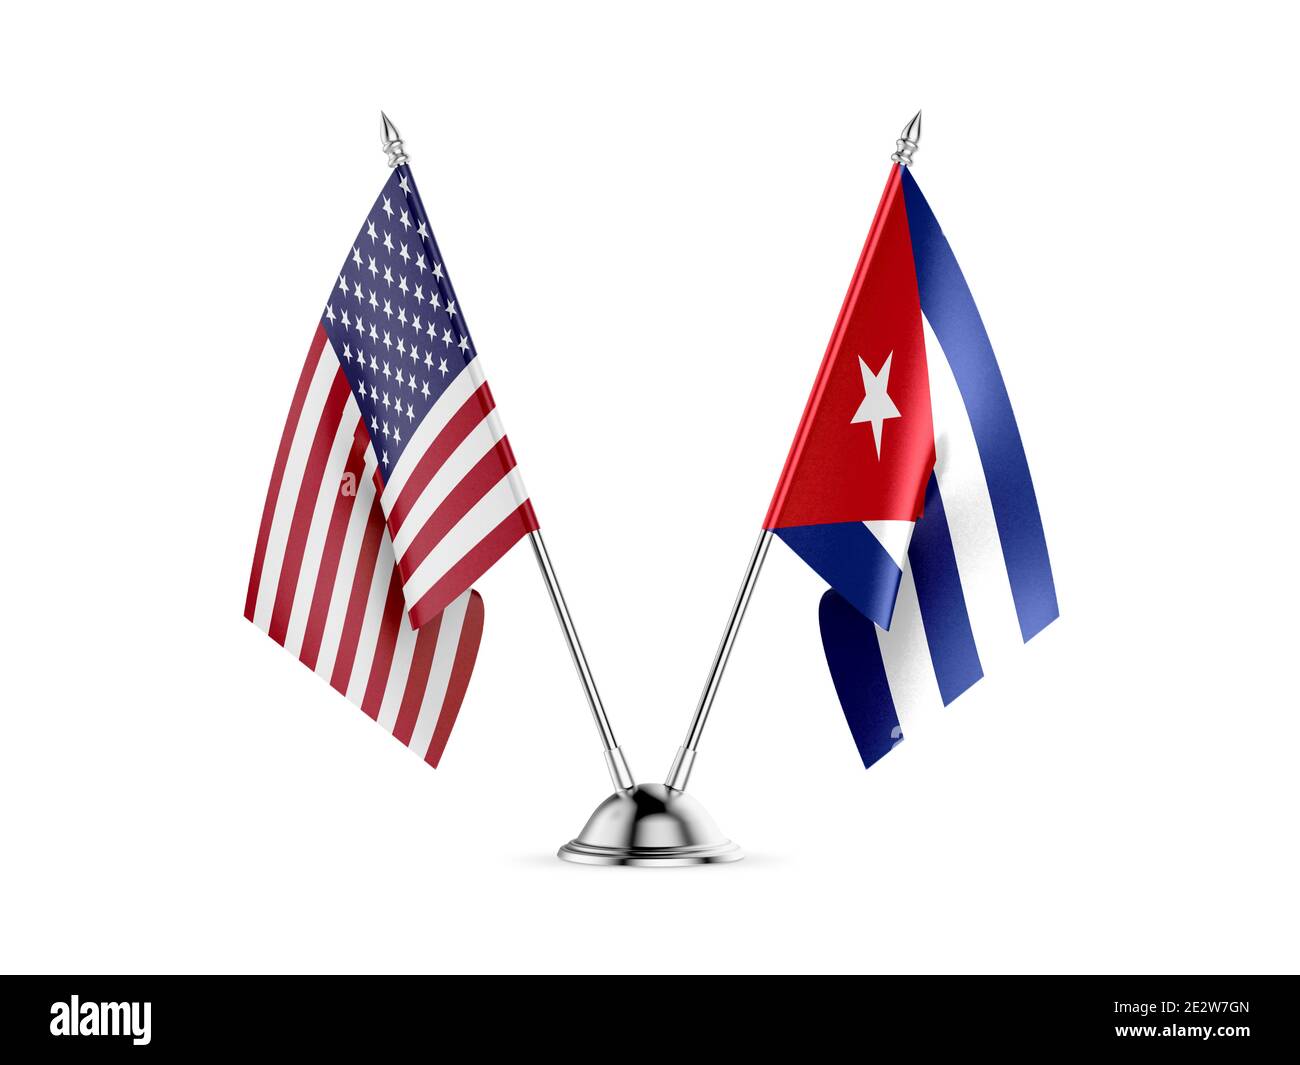 Desk flags, United States  America  and Cuba, isolated on white background. 3d image Stock Photo